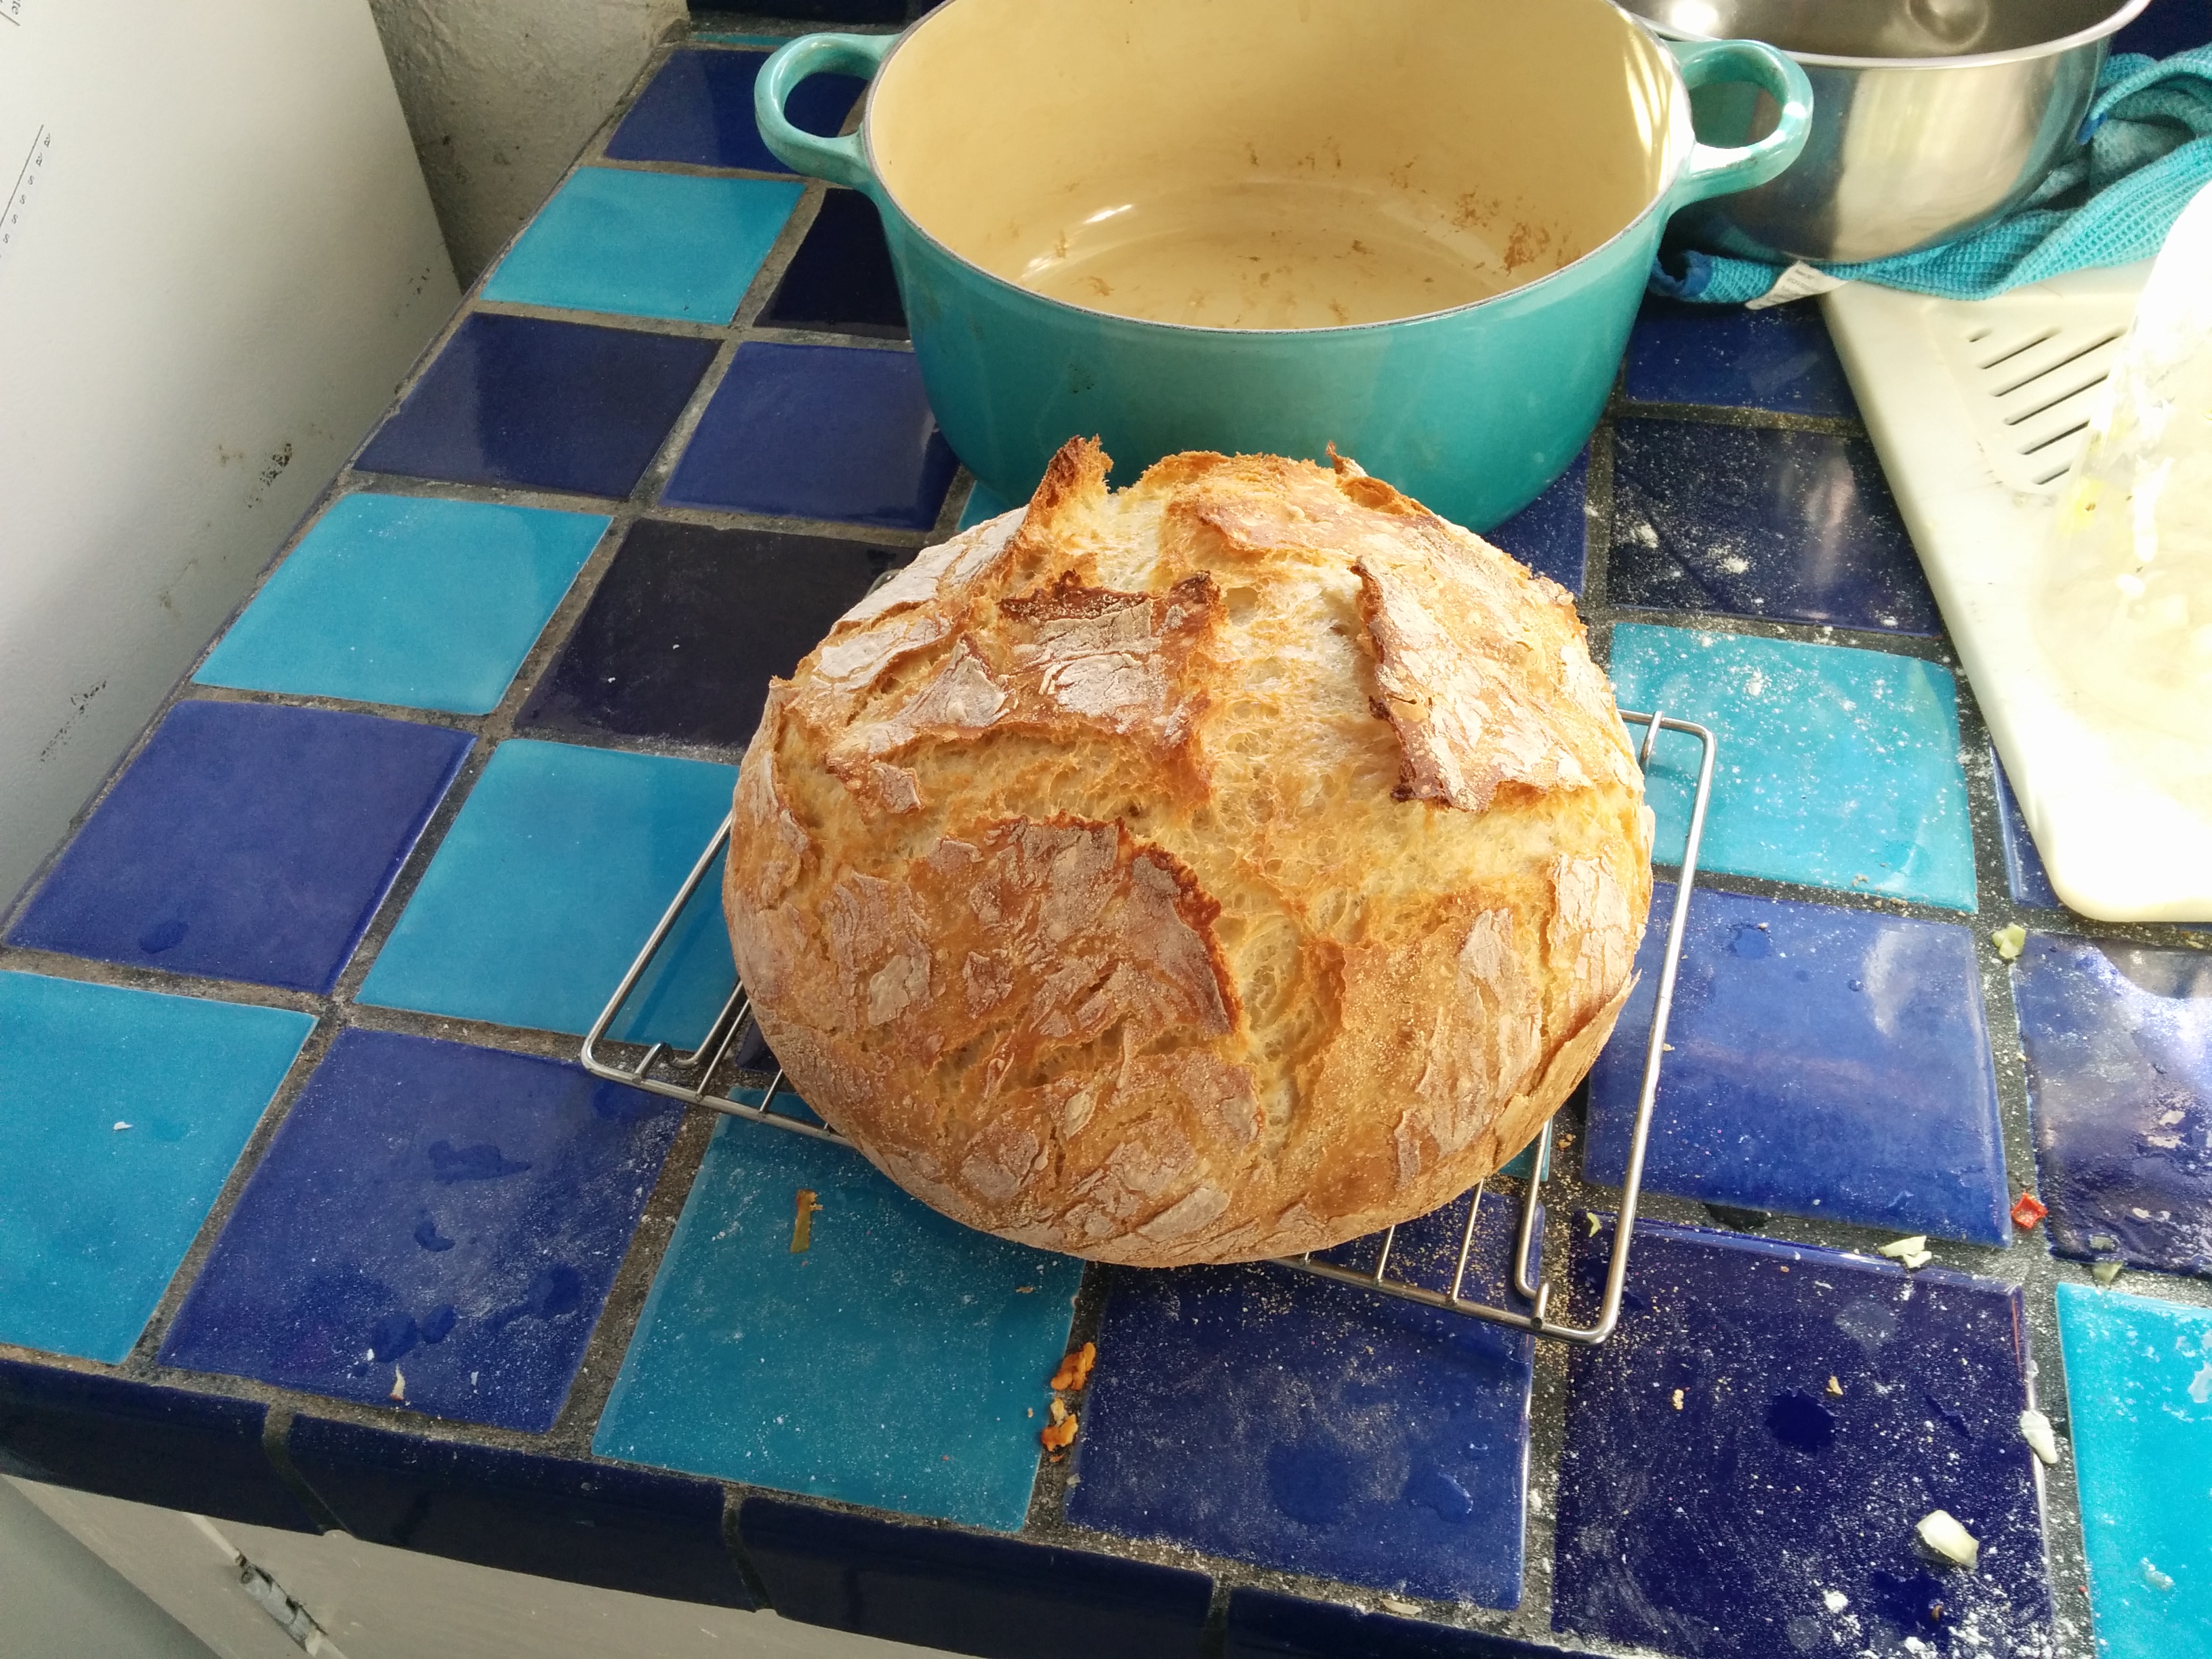 The most recent loaf of dutch-oven bread.